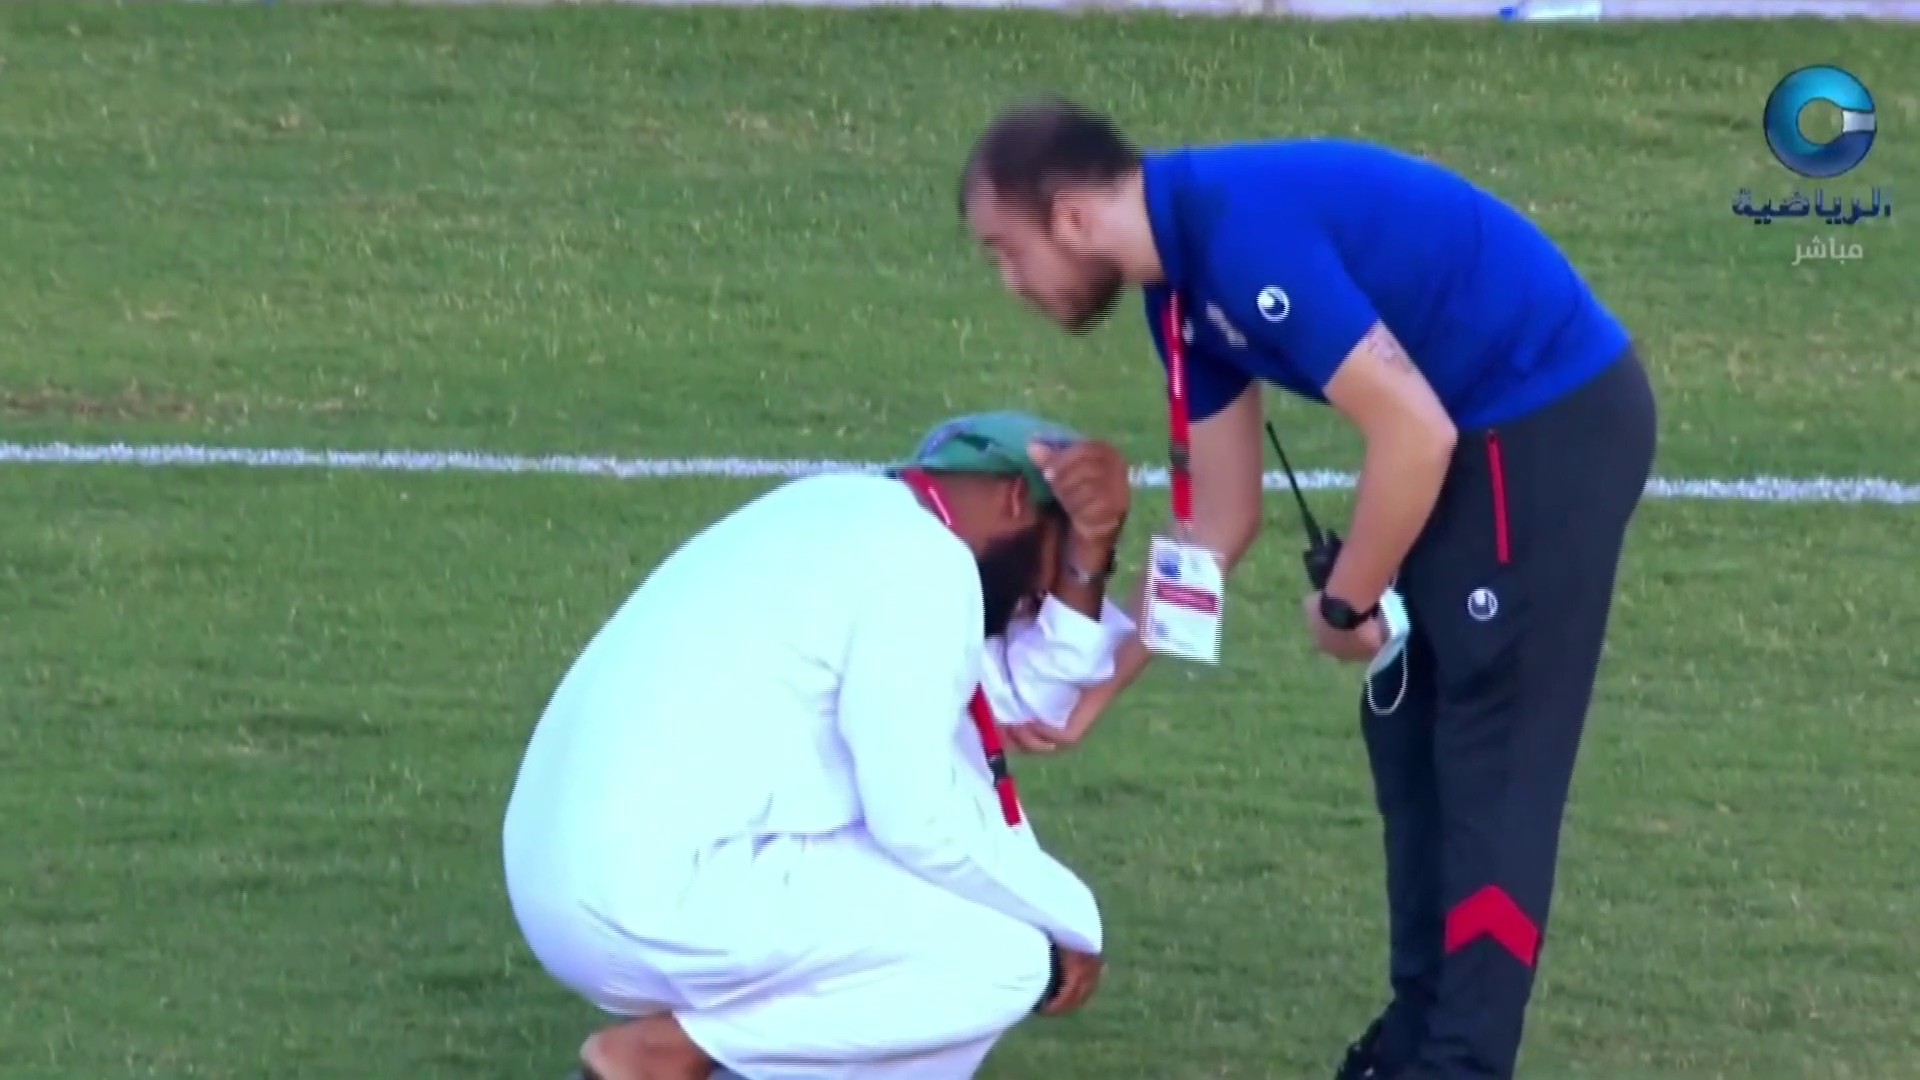 Oman player dies aged 29 after collapsing during warm-up before Muscat match